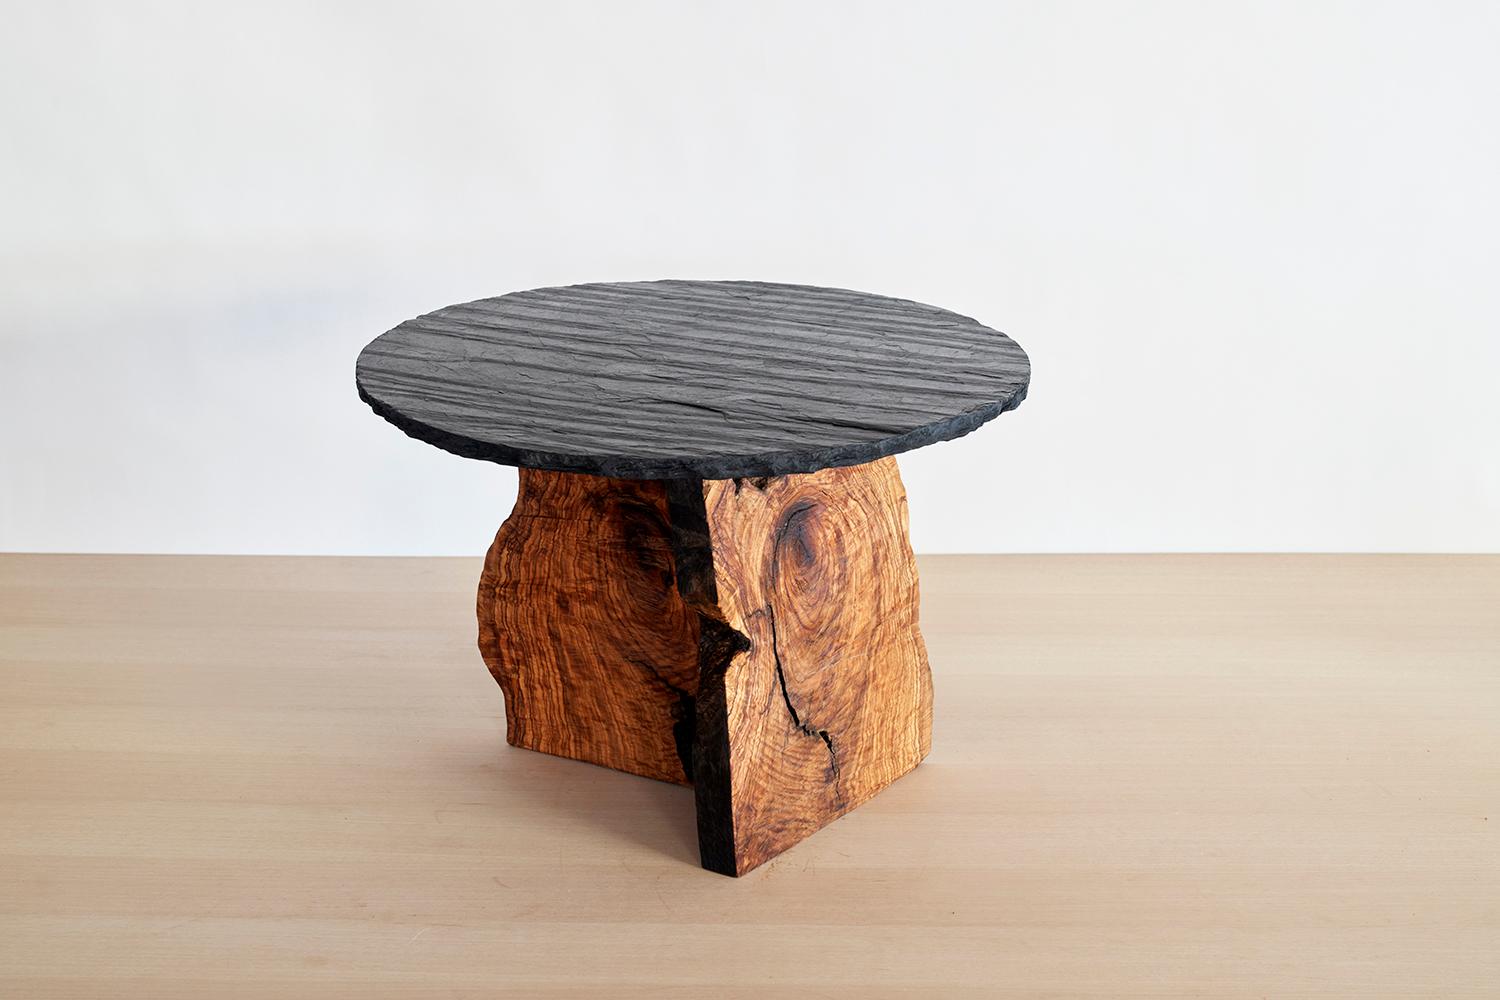 Art Brut Center Table by Jean-Baptiste Van Den Heede
Unique piece
Dimensions: D 60 x H 41 cm
Materials: Natural olive wood and Slate stone.

Living room table from the ART BRUT collection. A functional sculpture that can be seen as a side table as